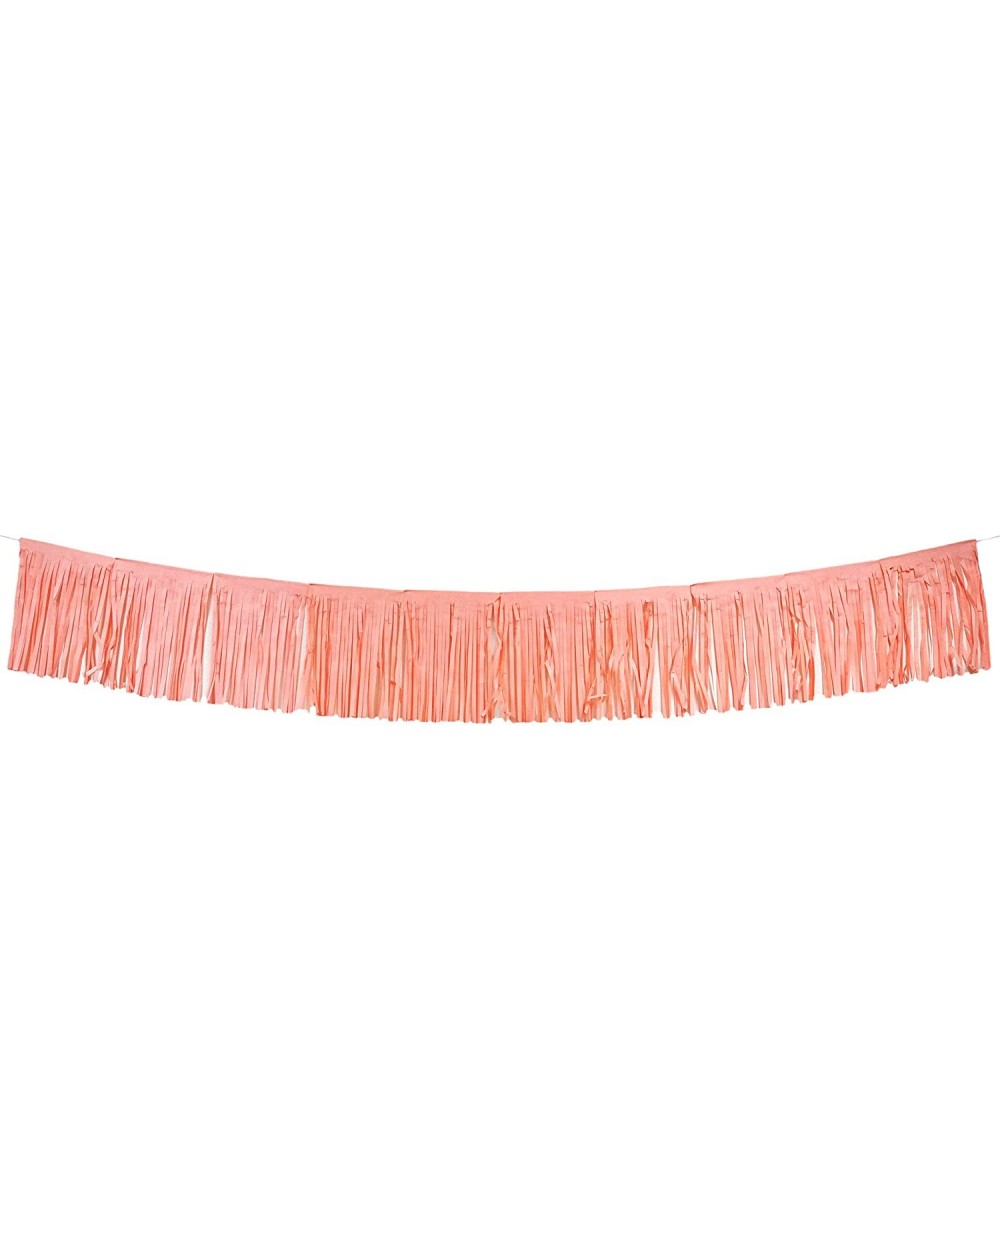 Tissue Paper Fringe Tassel Party Garland - Perfect Backdrop for All ...